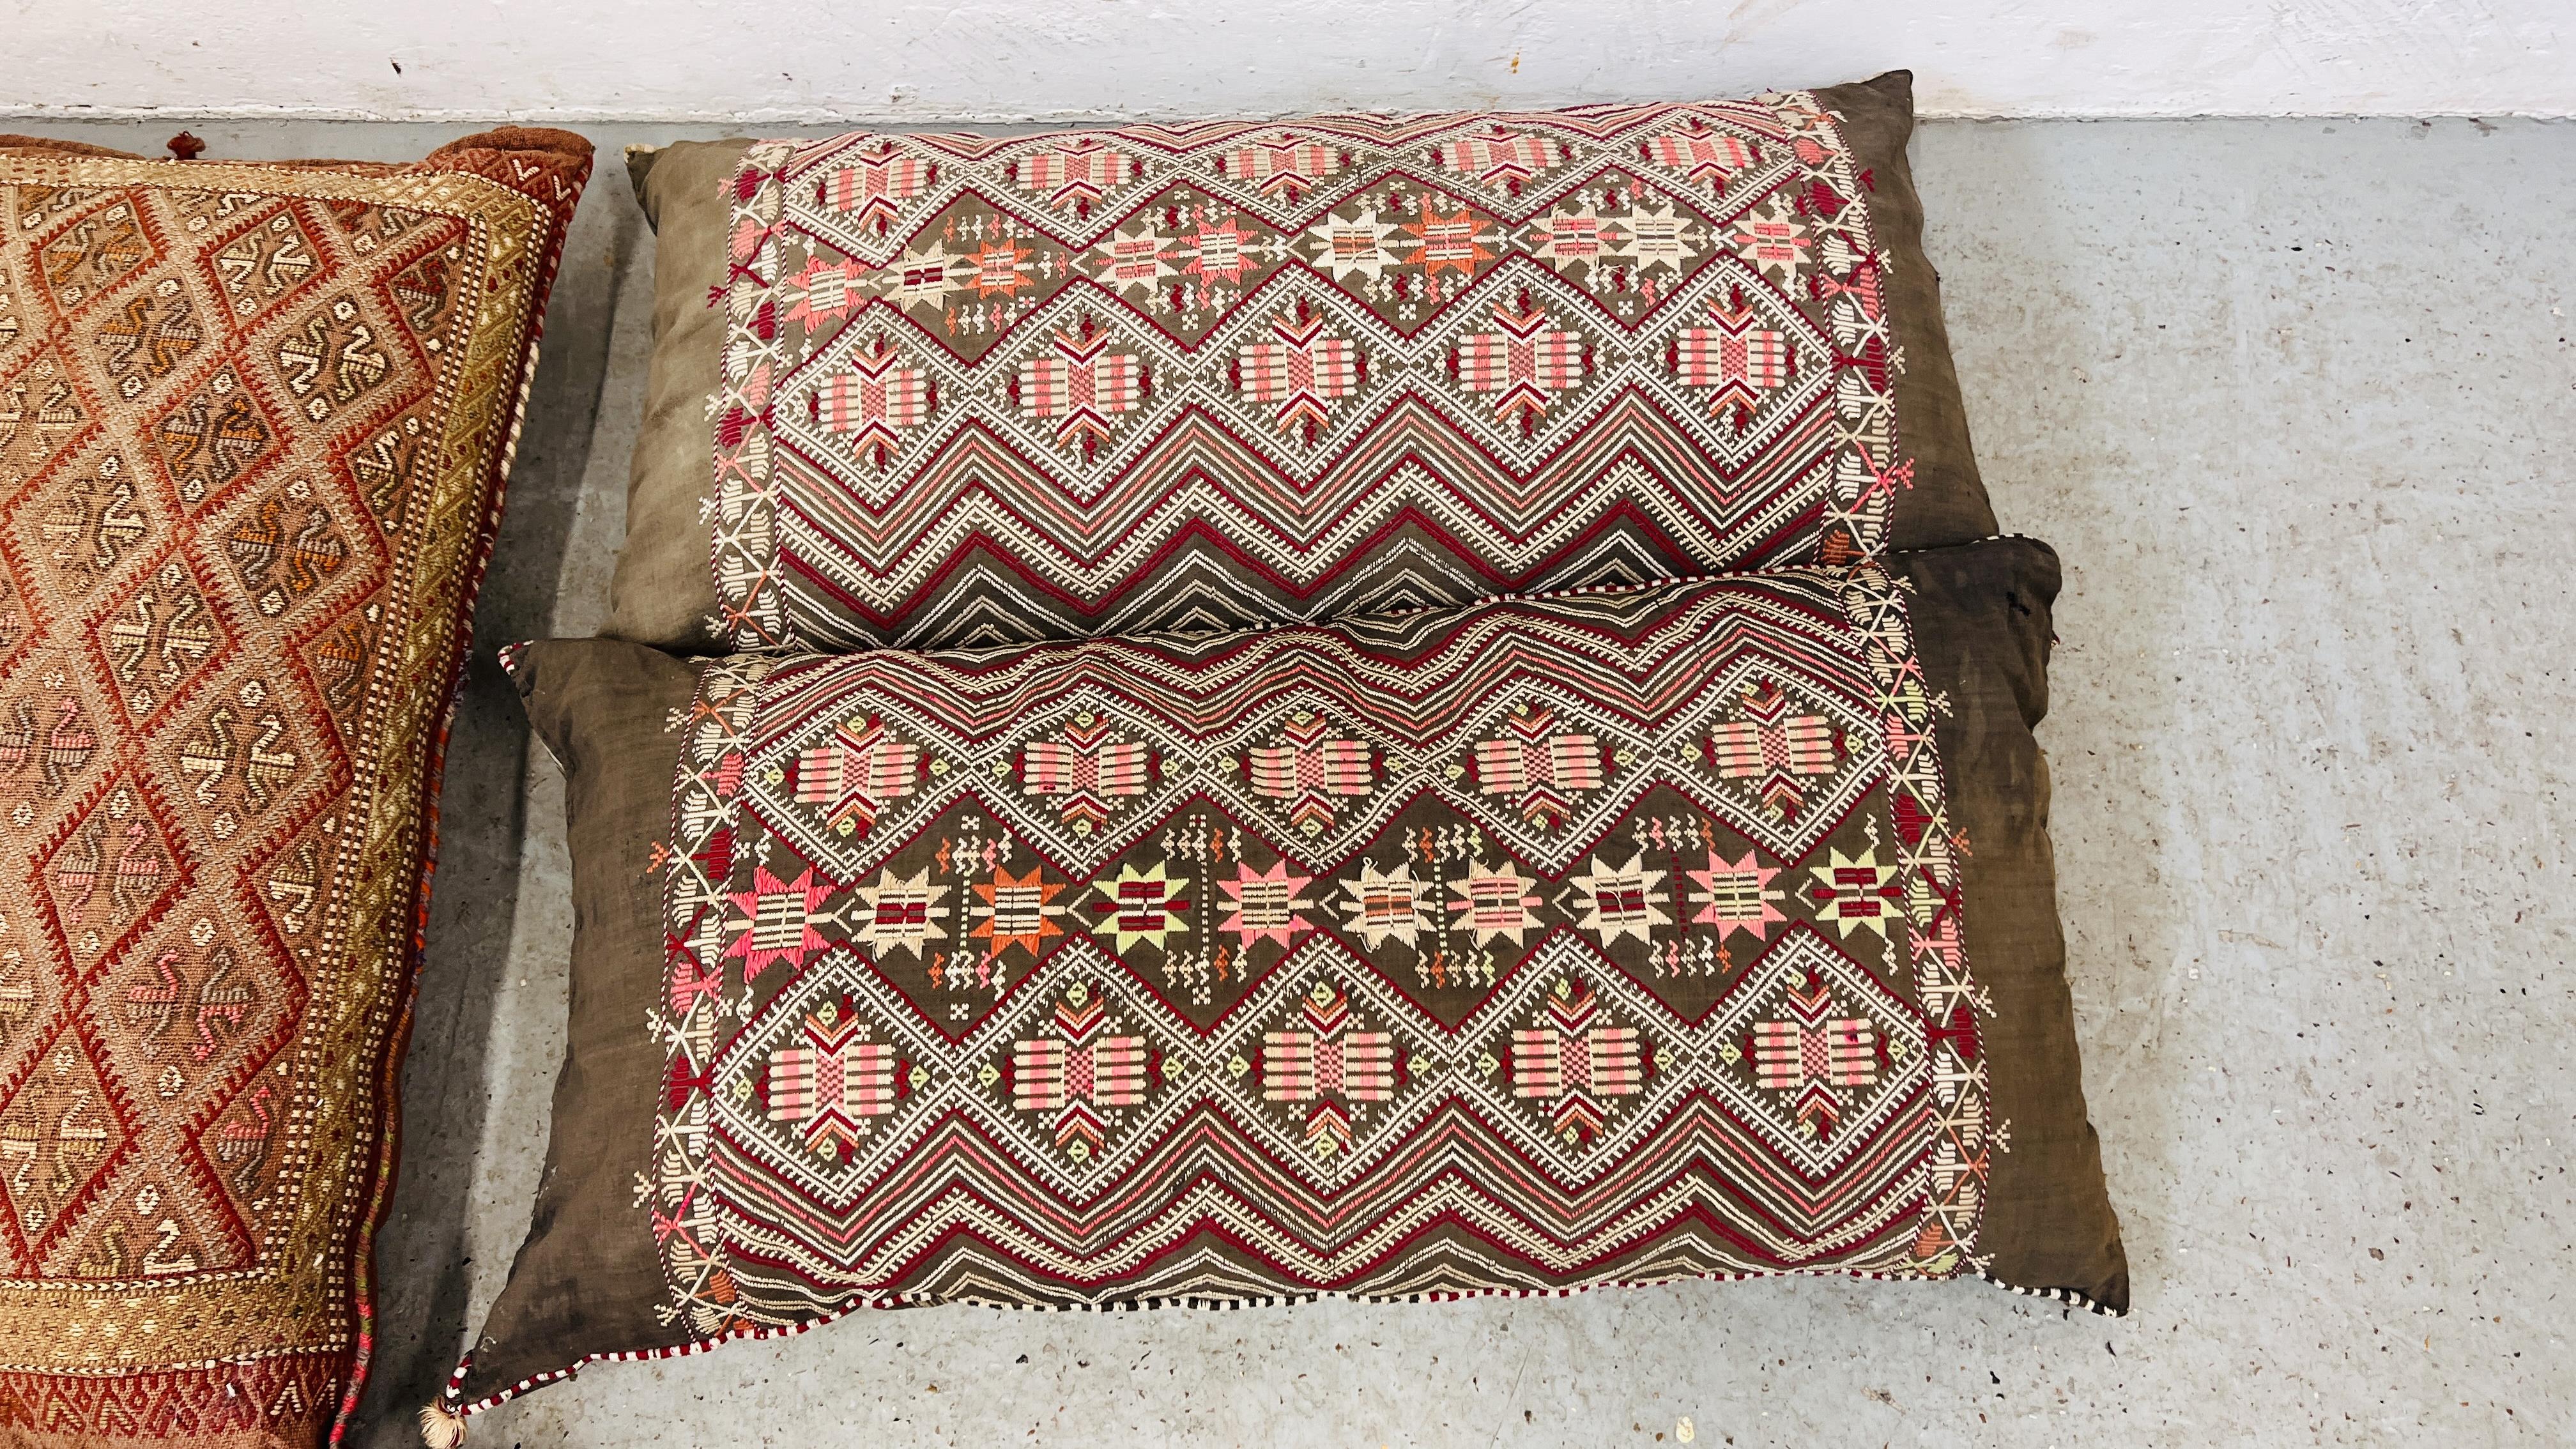 TWO PAIRS OF MIDDLE EASTERN HANDCRAFTS CUSHIONS ALONG WITH A FURTHER LARGER FLAT WEAVE EXAMPLE - Image 2 of 6